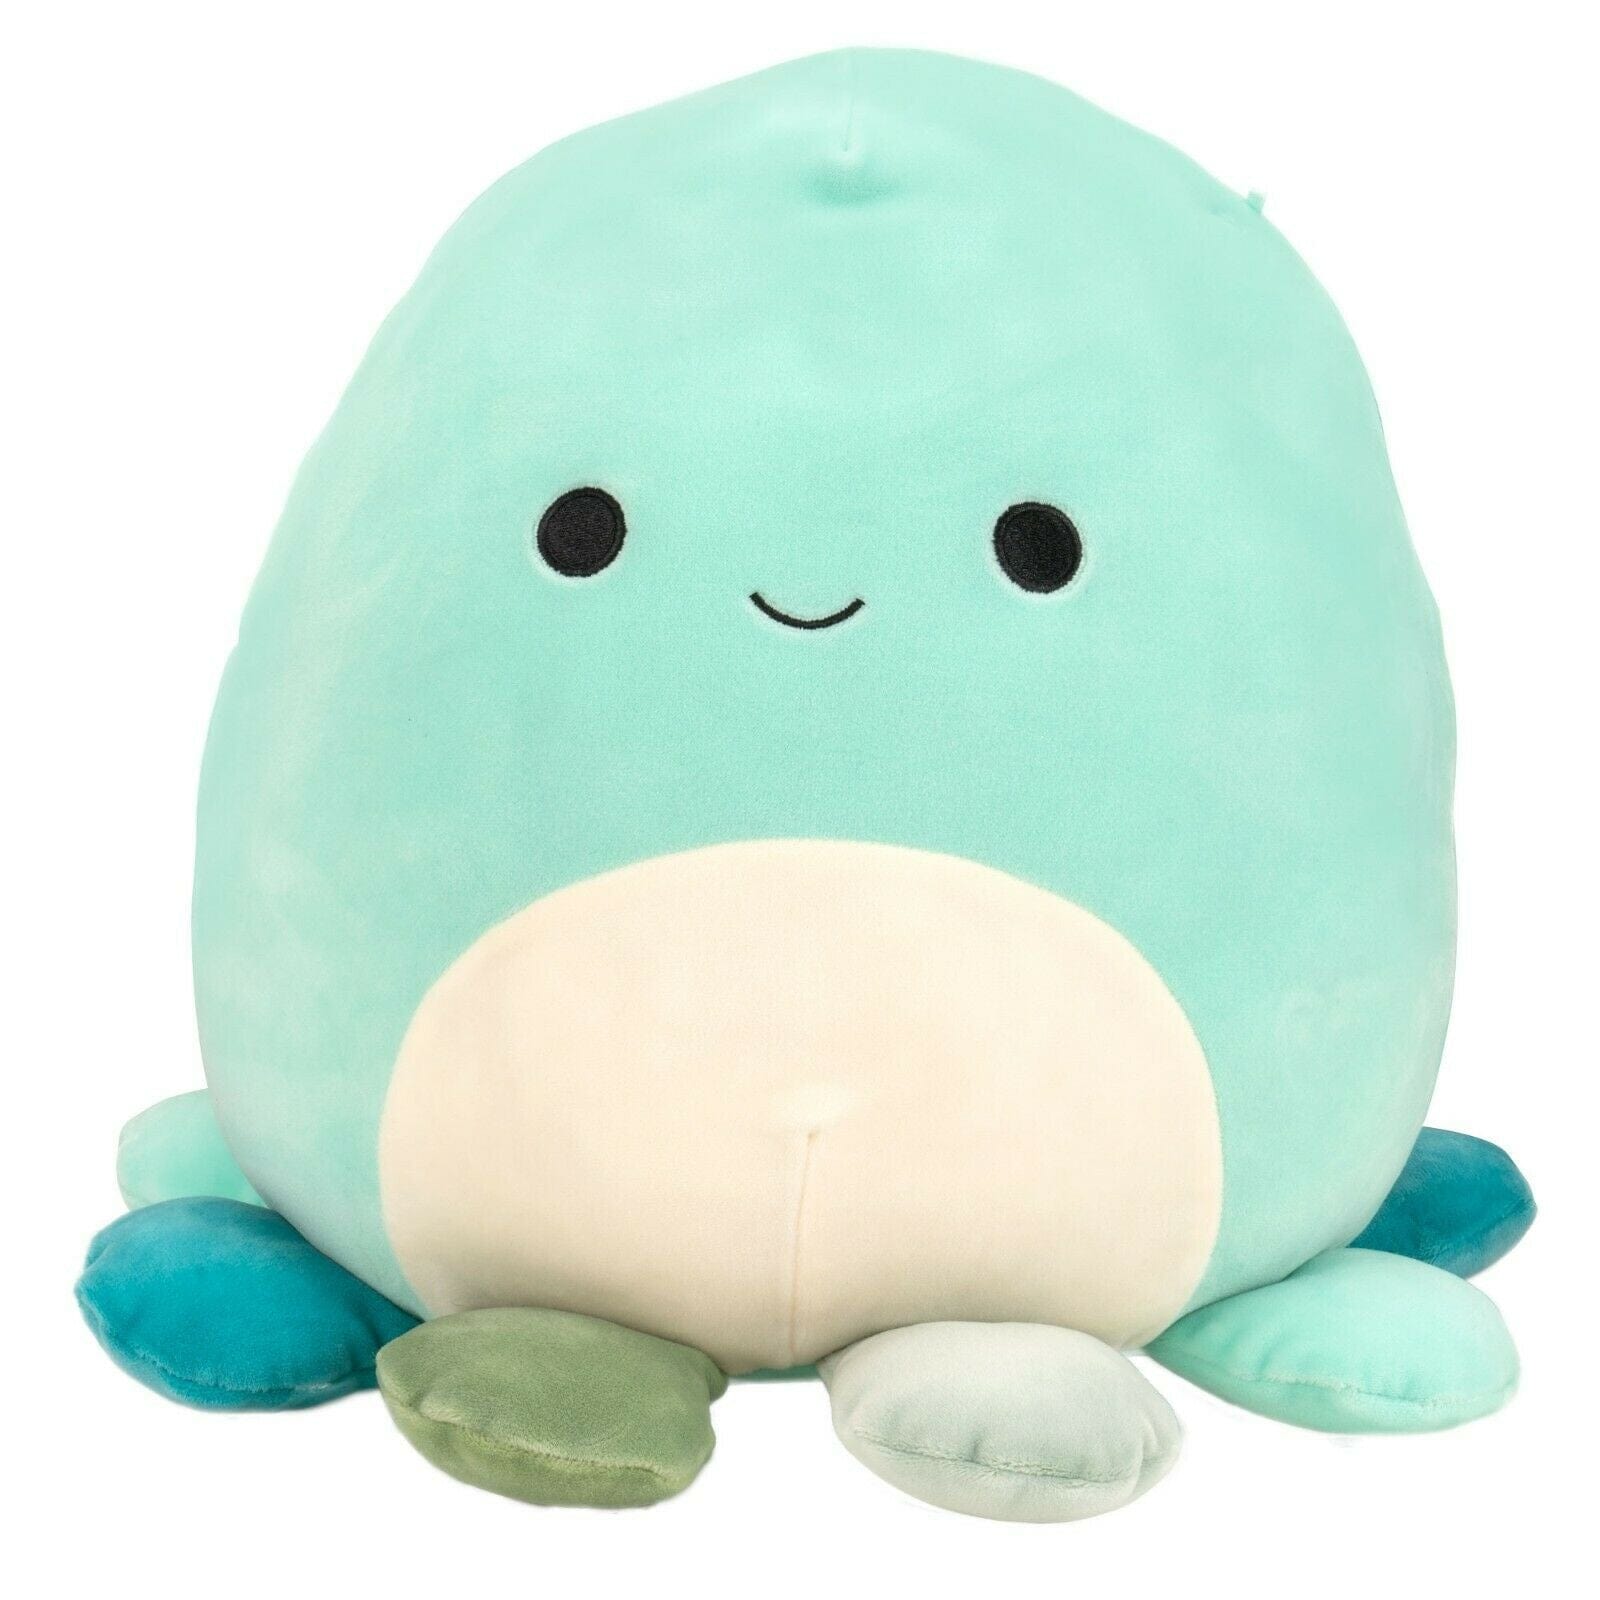 Squishmallows 20 Teal Multi-Colored Octopus Plush Toy